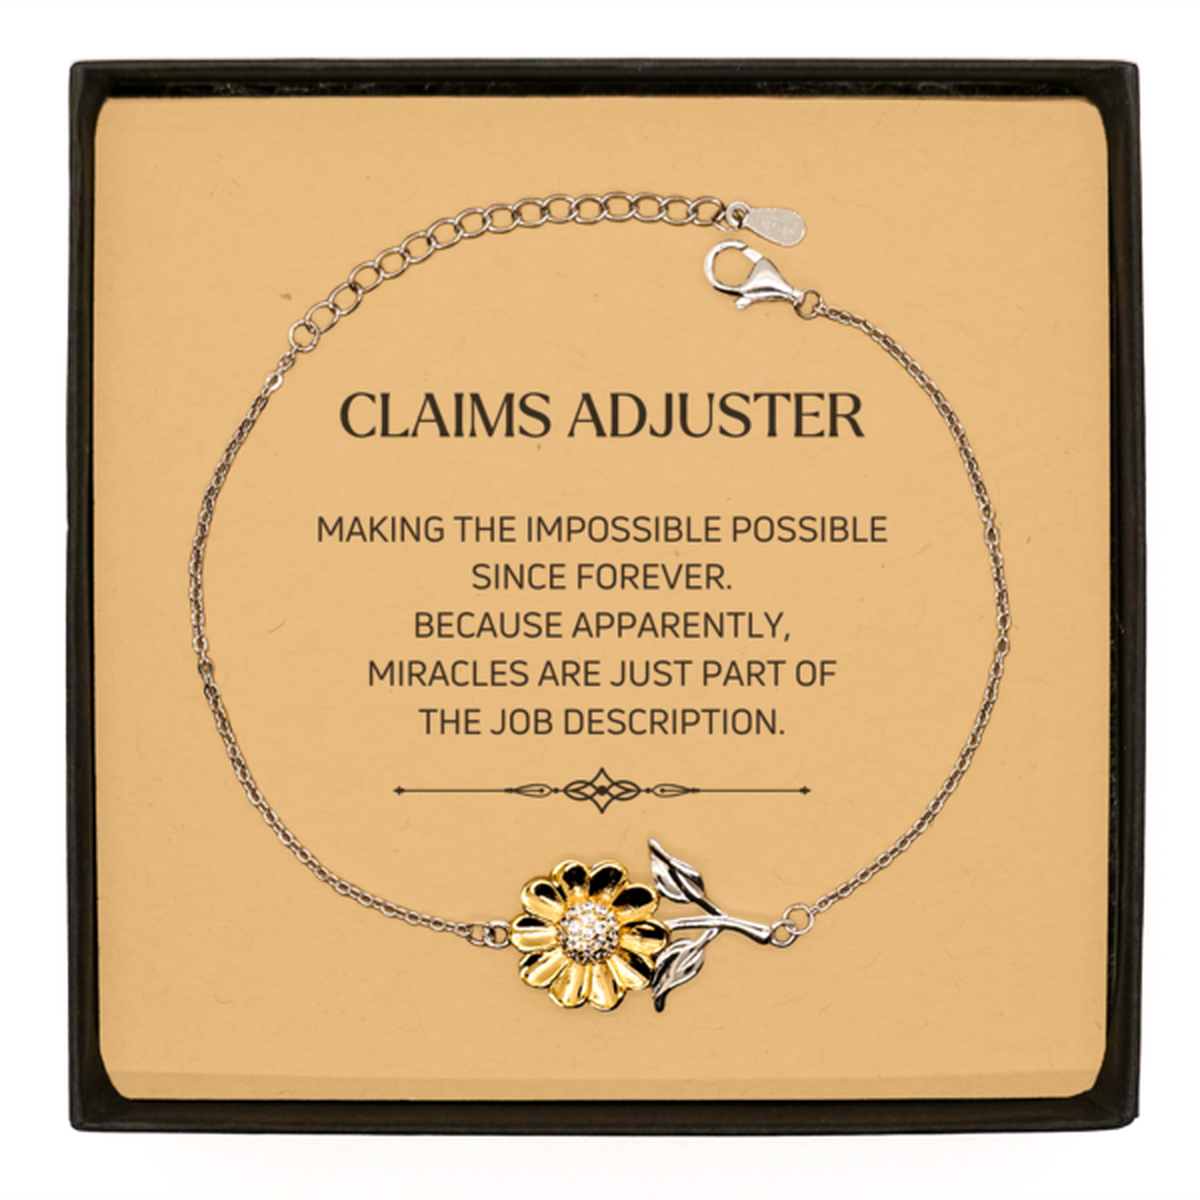 Funny Claims Adjuster Gifts, Miracles are just part of the job description, Inspirational Birthday Sunflower Bracelet For Claims Adjuster, Men, Women, Coworkers, Friends, Boss